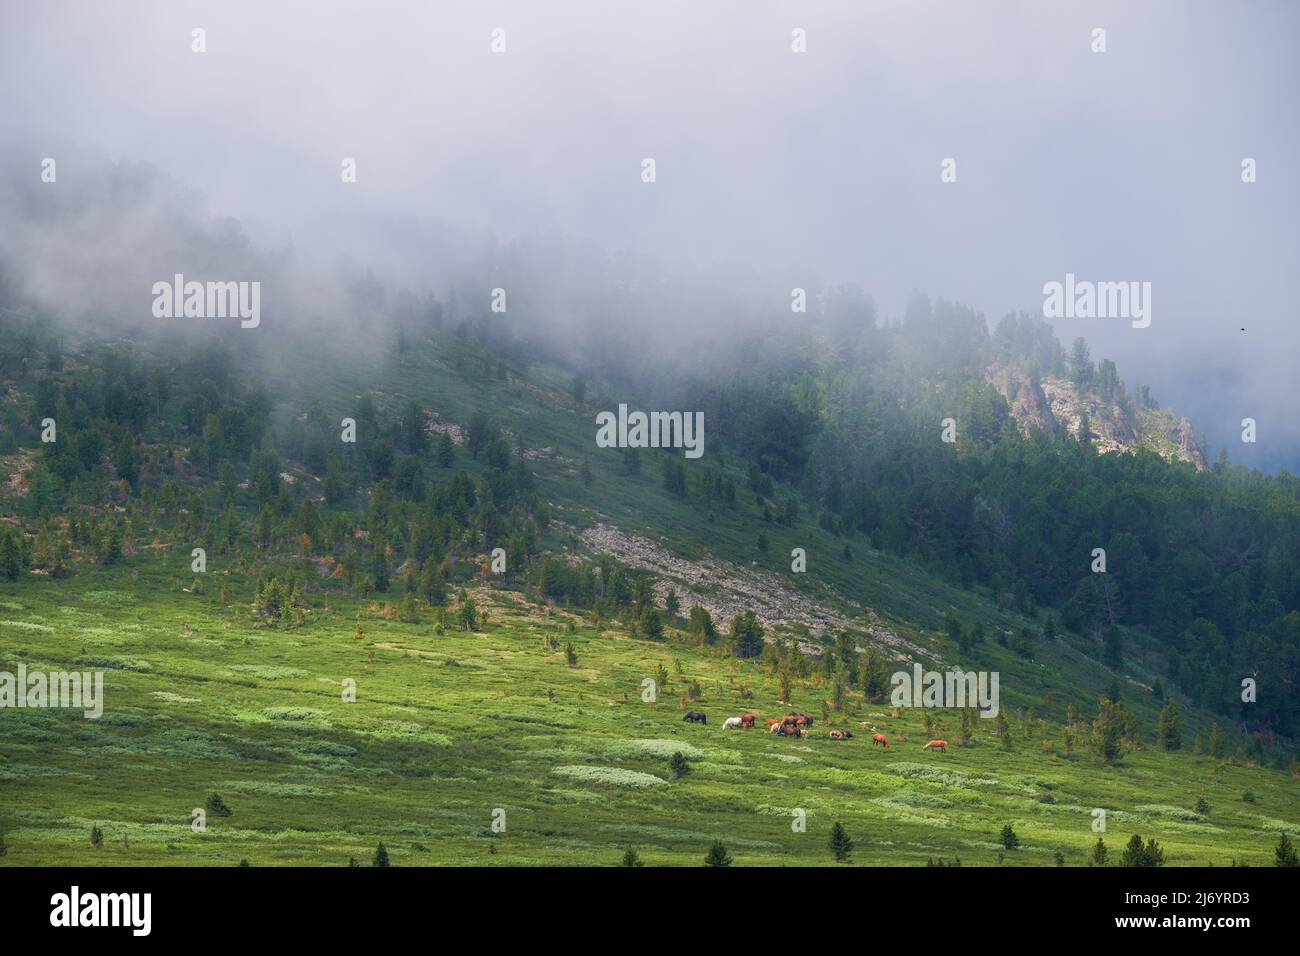 Morning fog in mountains. A herd of horses is grazing under the mountain. Altai, Siberia. Stock Photo